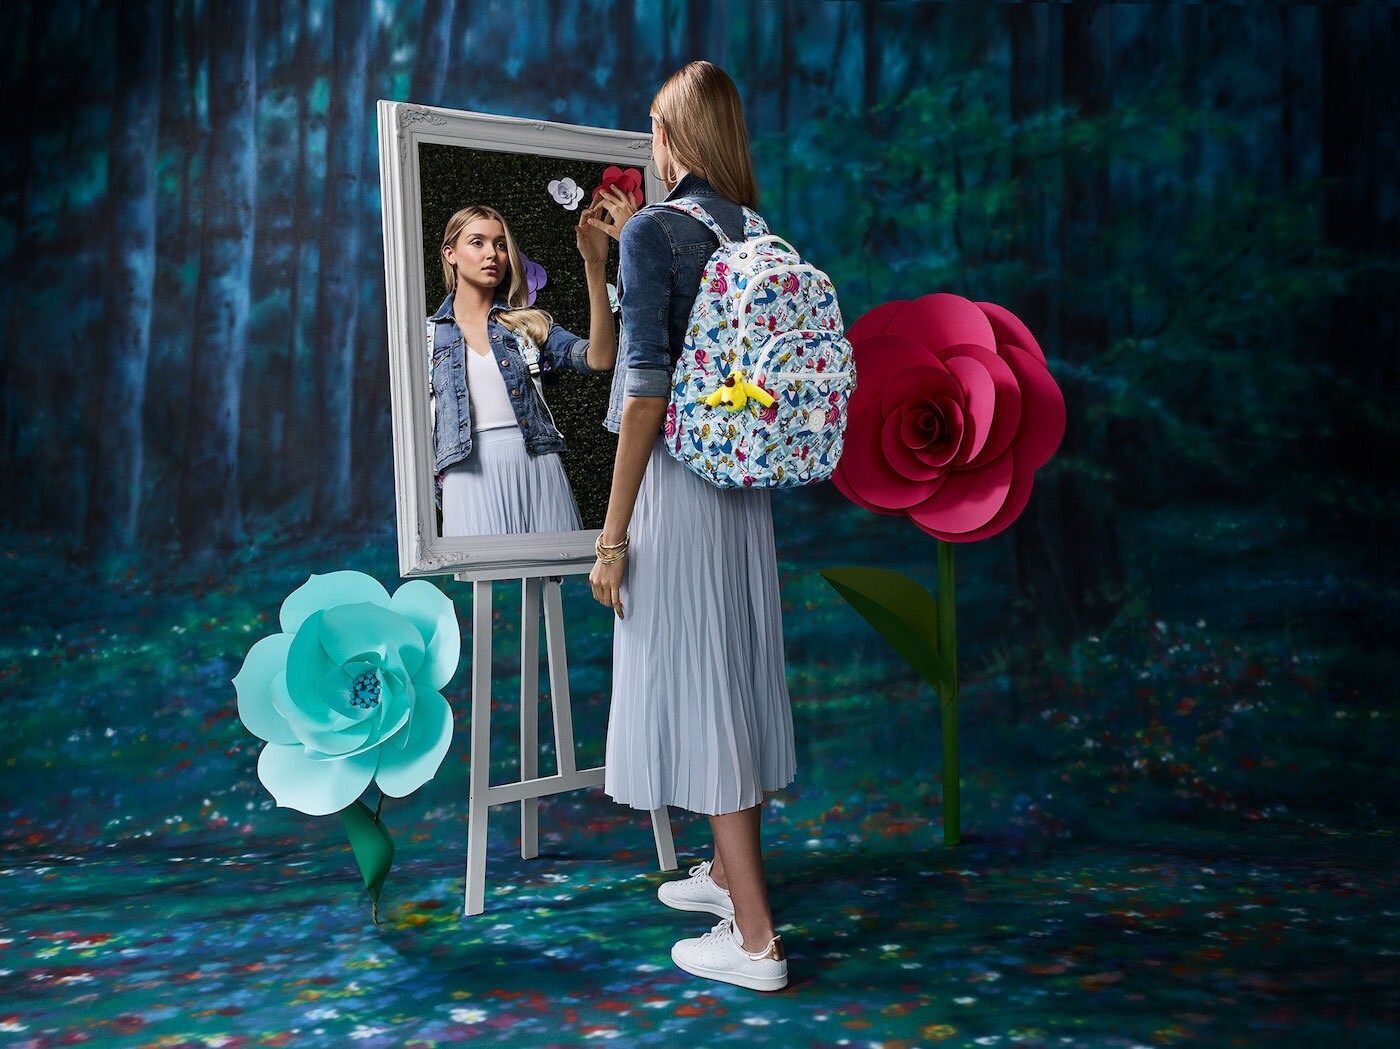 Fashion Items from Kipling's Alice in Wonderland Collection